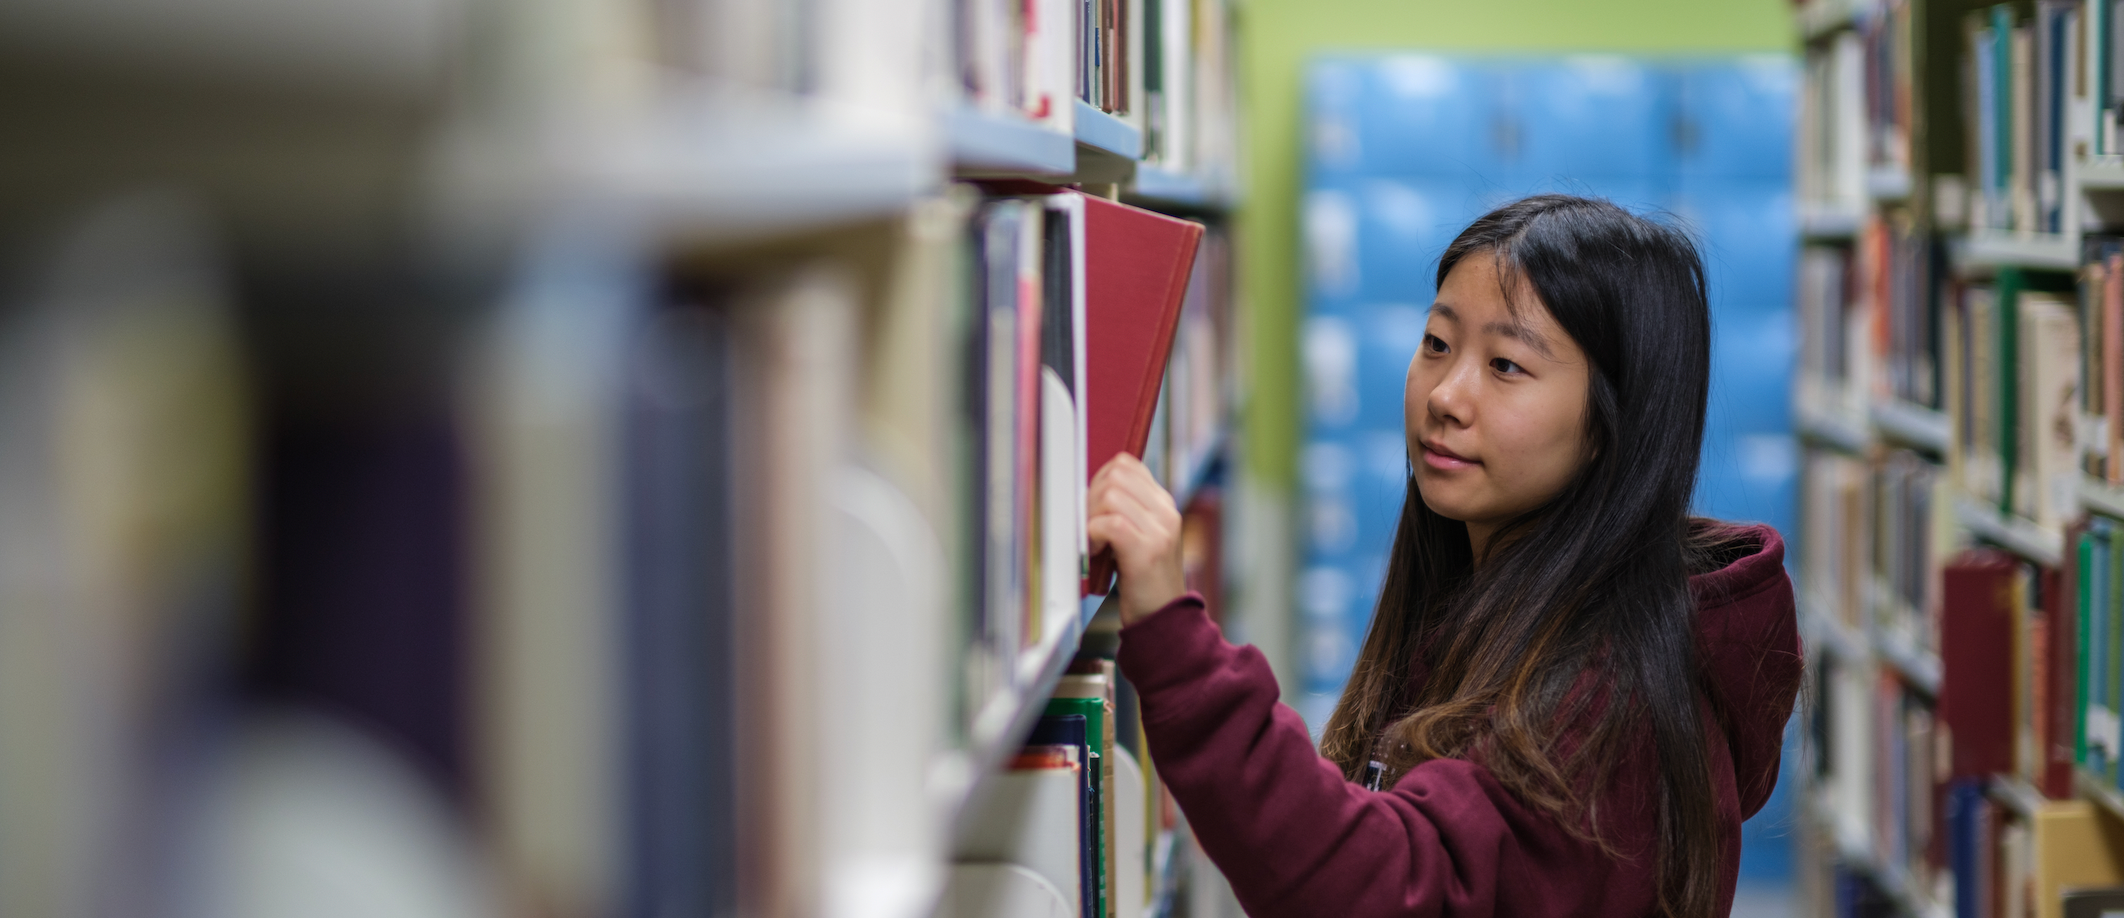 student in library looking at book on shelf